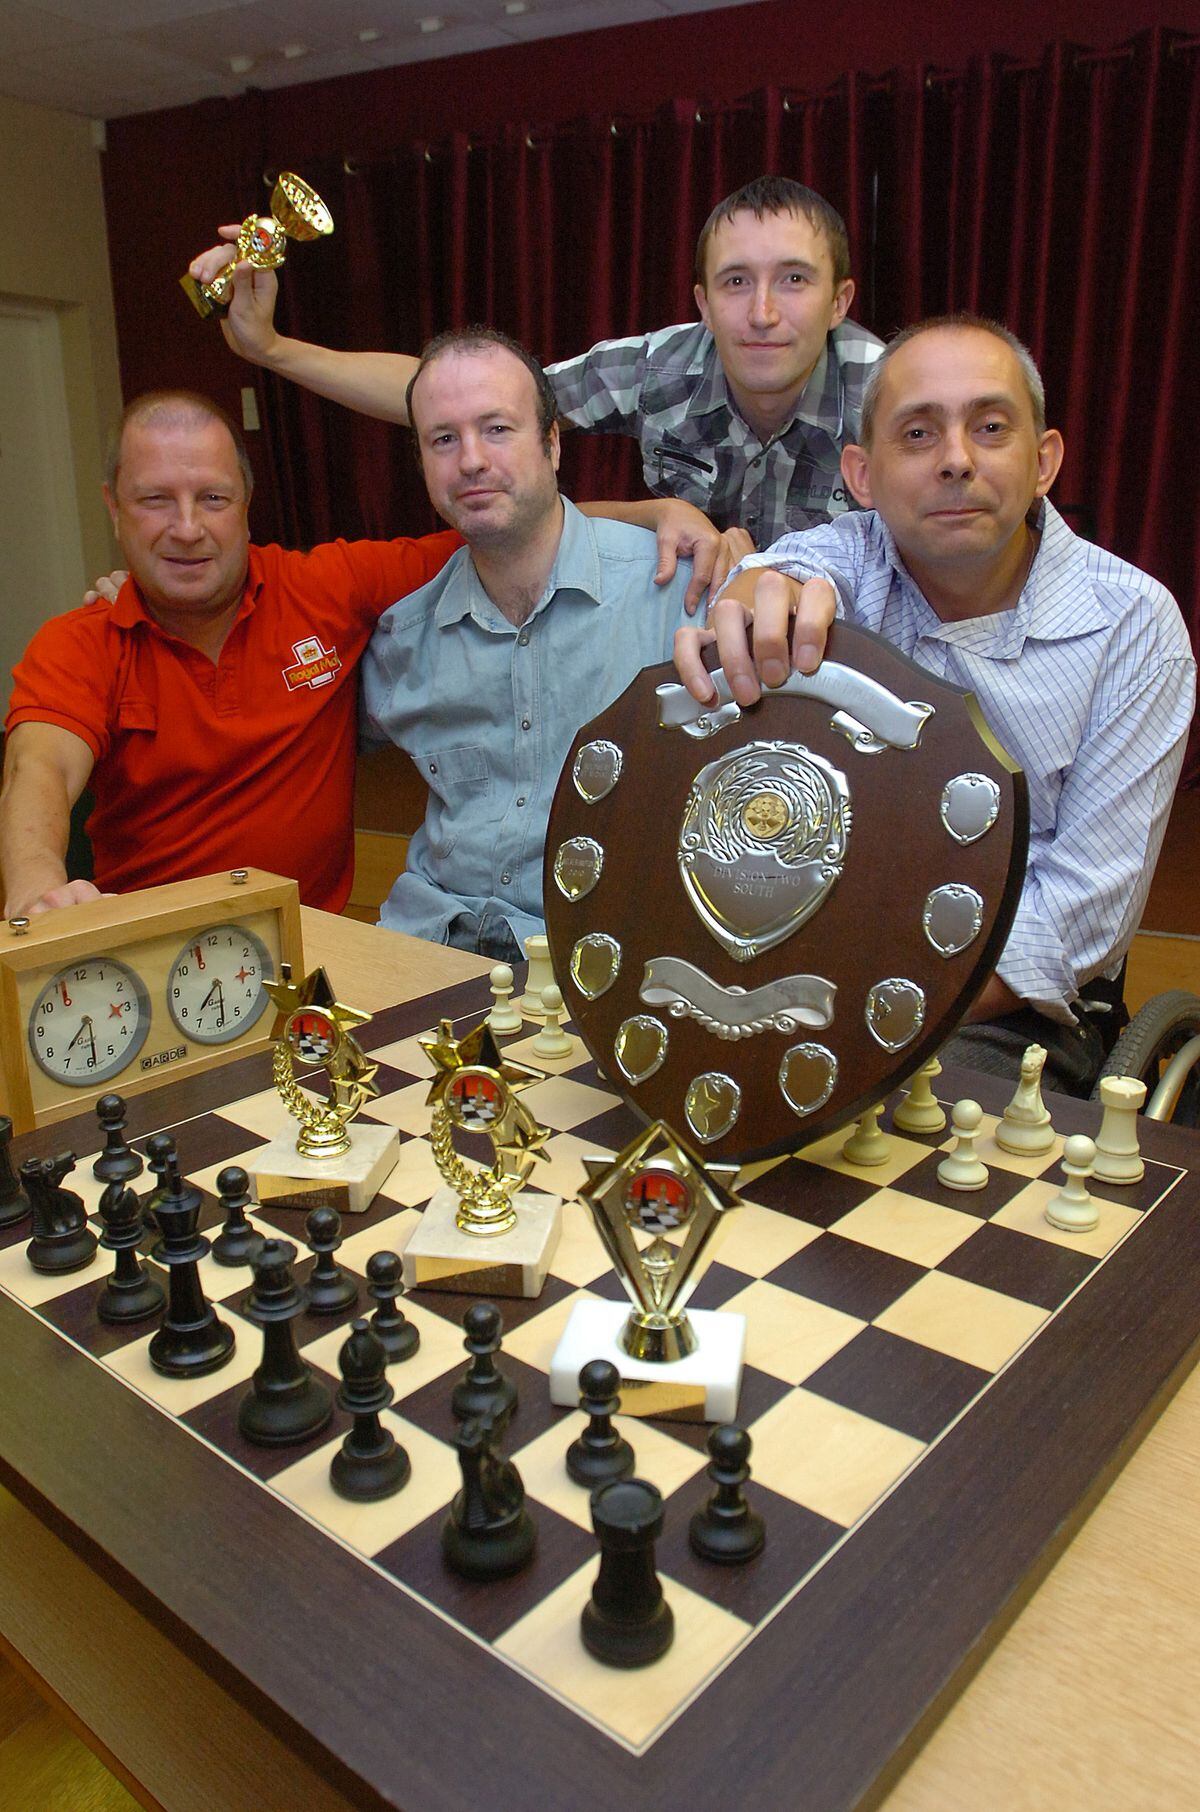 Steve, left, with colleagues from Wolverhampton Chess Club after winning the Wolverhampton Summer League Division Two in 2010.